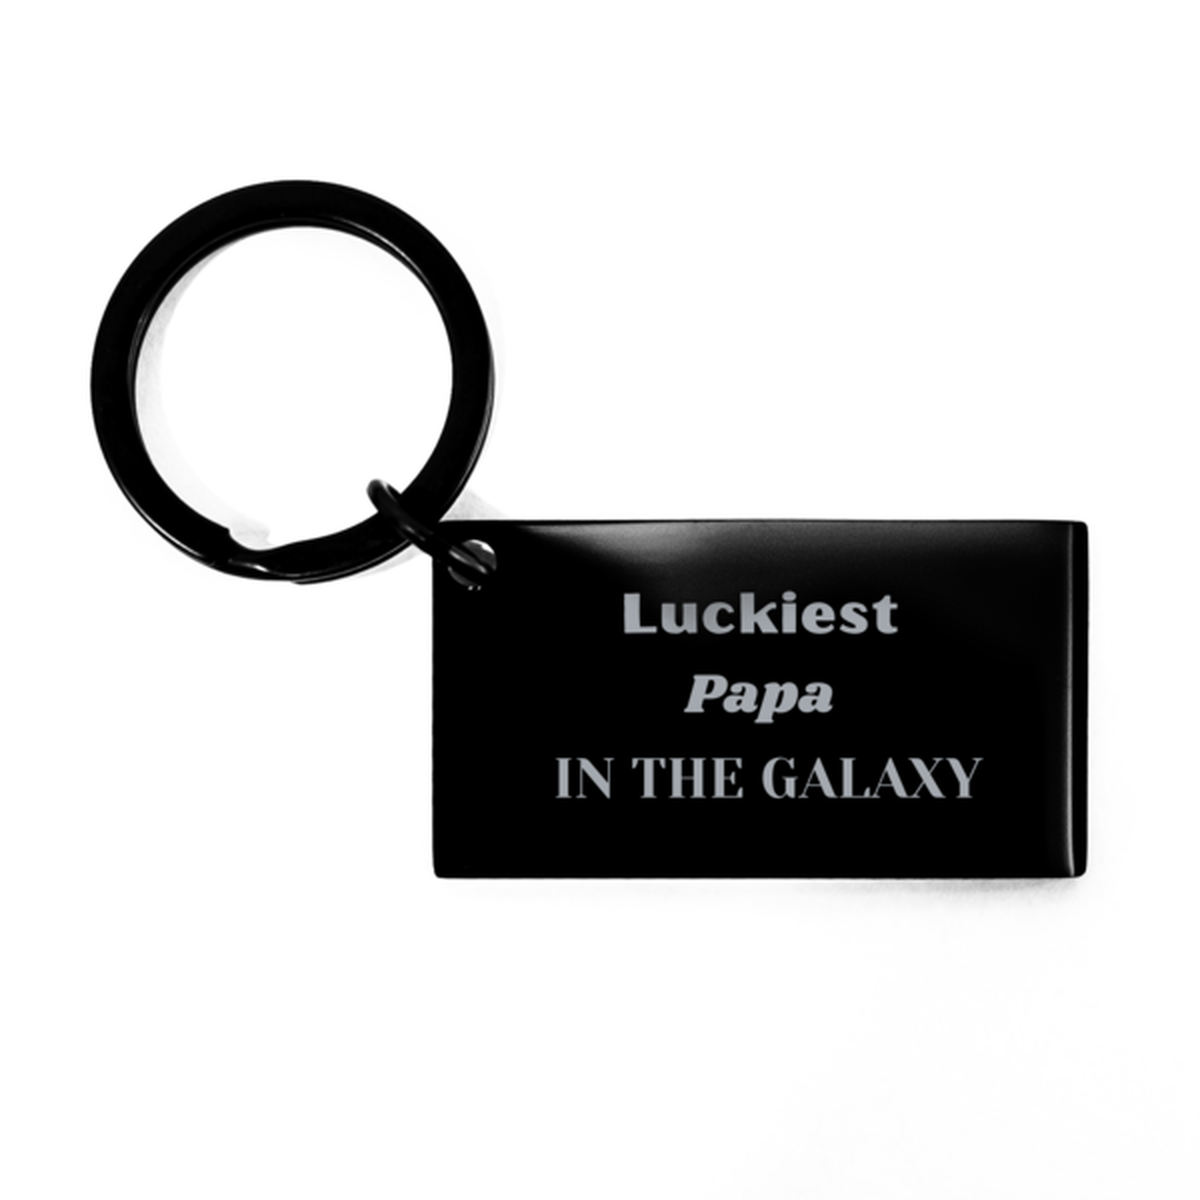 Luckiest Papa in the Galaxy, To My Papa Engraved Gifts, Christmas Papa Keychain Gifts, X-mas Birthday Unique Gifts For Papa Men Women